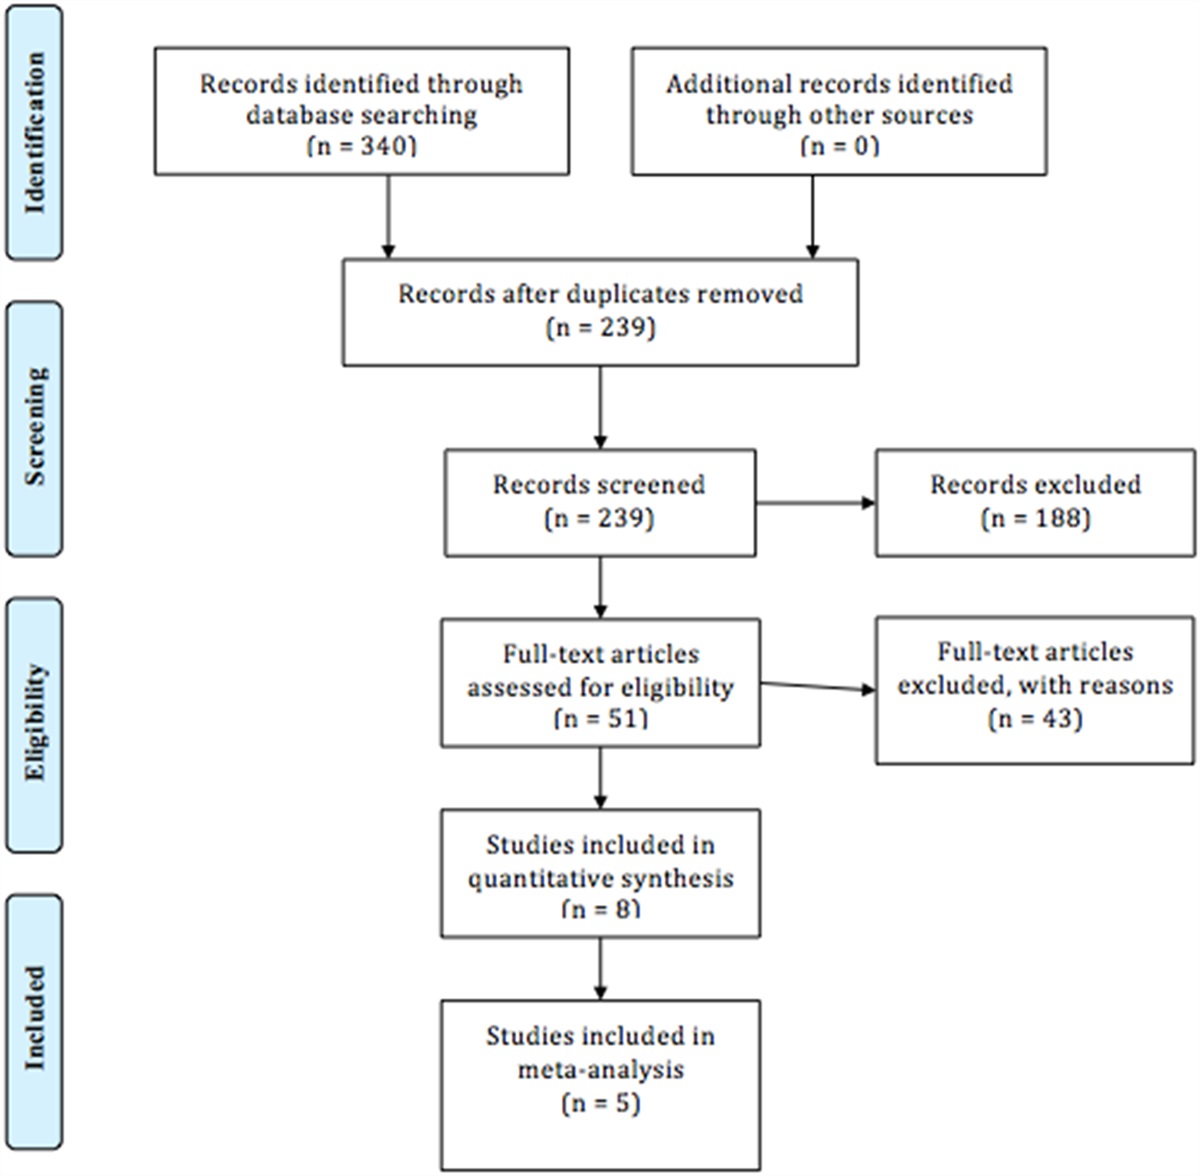 The Effects of Pre-existing Mood Disorders on Patient-Reported Outcomes After Arthroscopic Rotator Cuff Repair: A Systematic Review and Meta-analysis